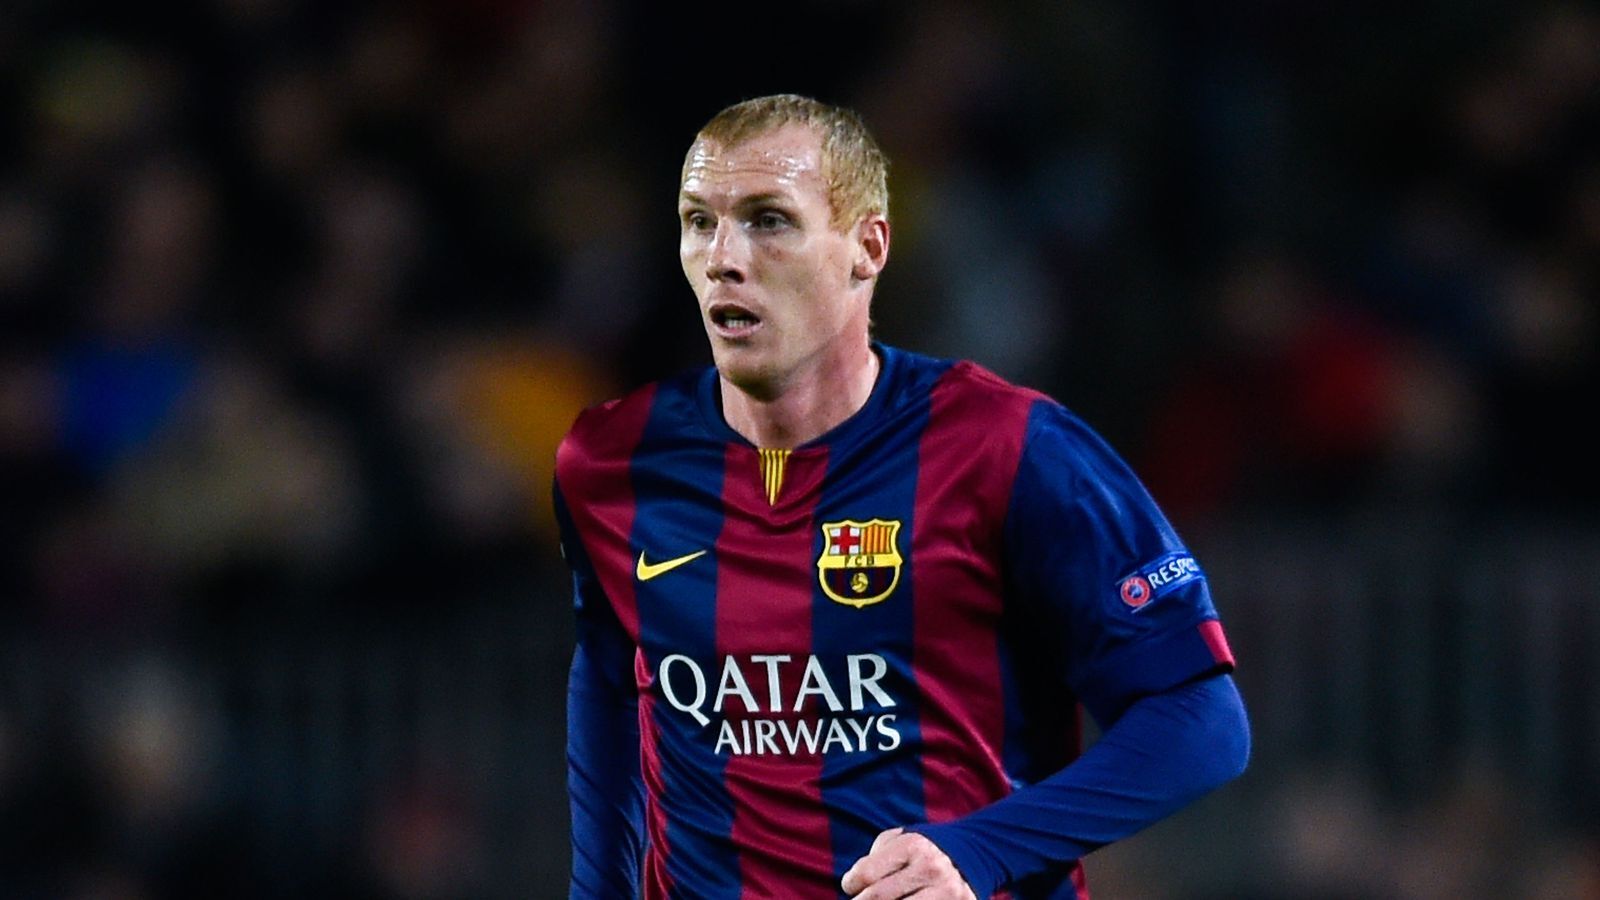 Jeremy Mathieu ends his career after suffering from knee injury  